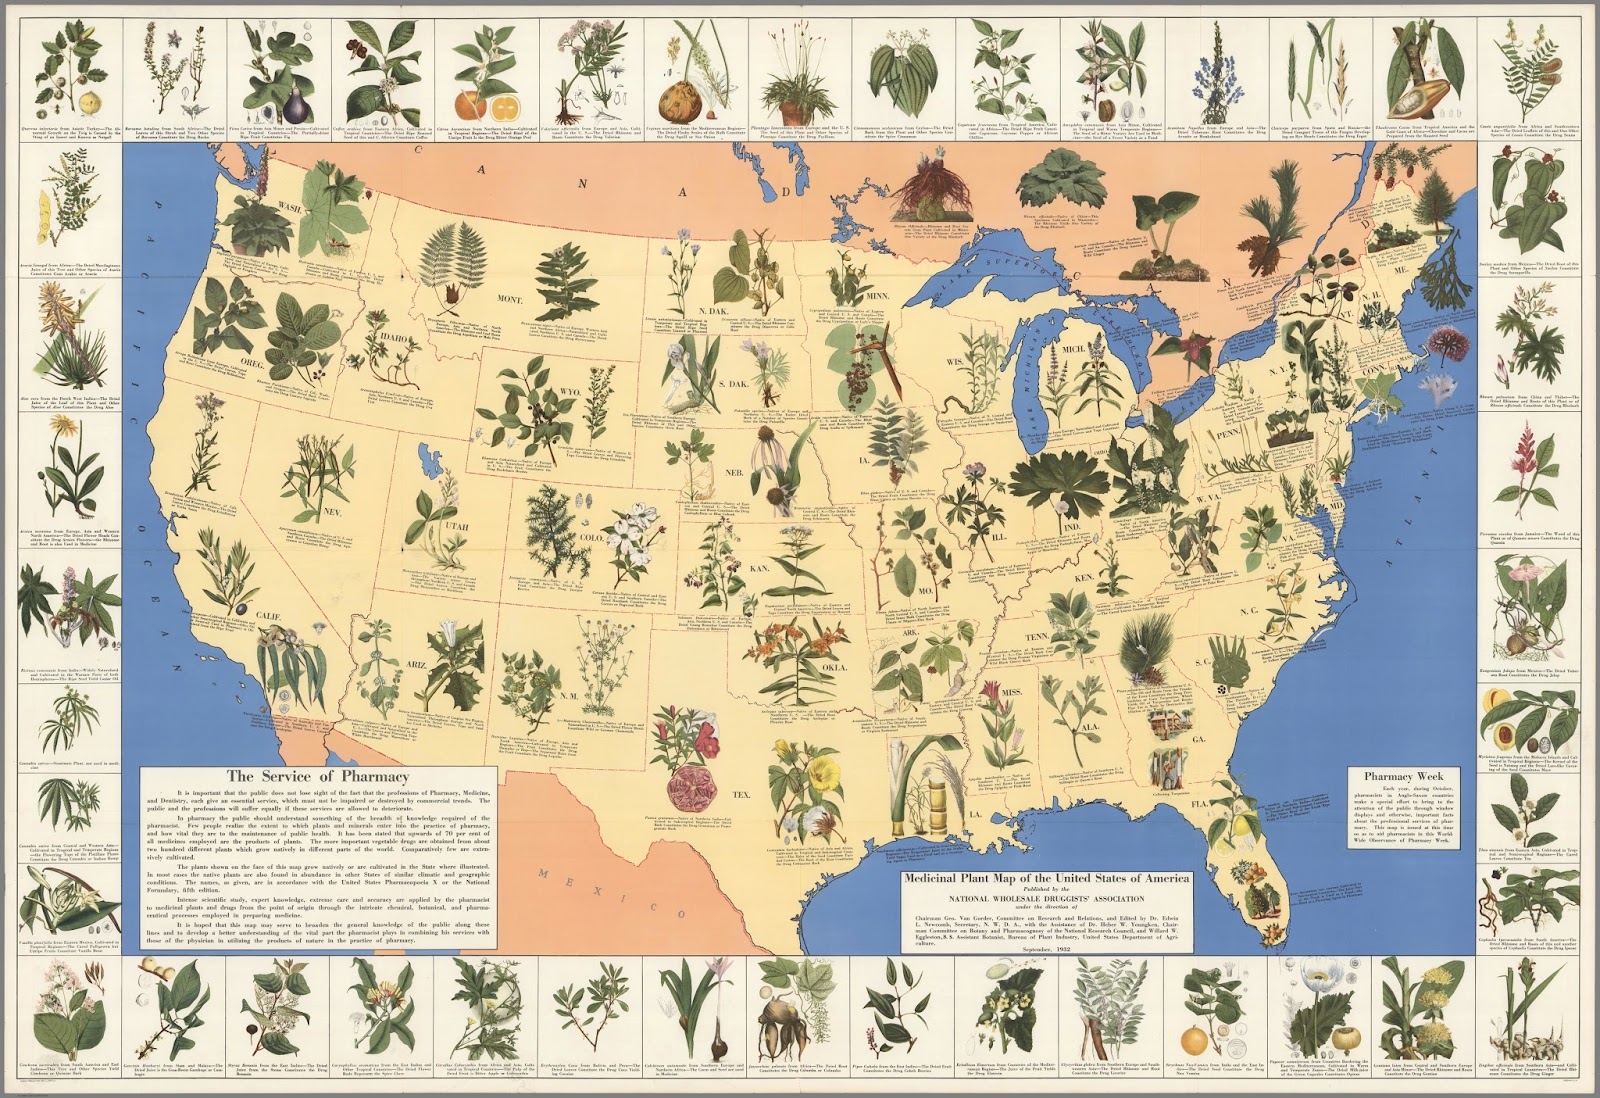 Fascinating-1930’s-Pharmacist-Map-of-Herbal-Cures-Released-To-Public